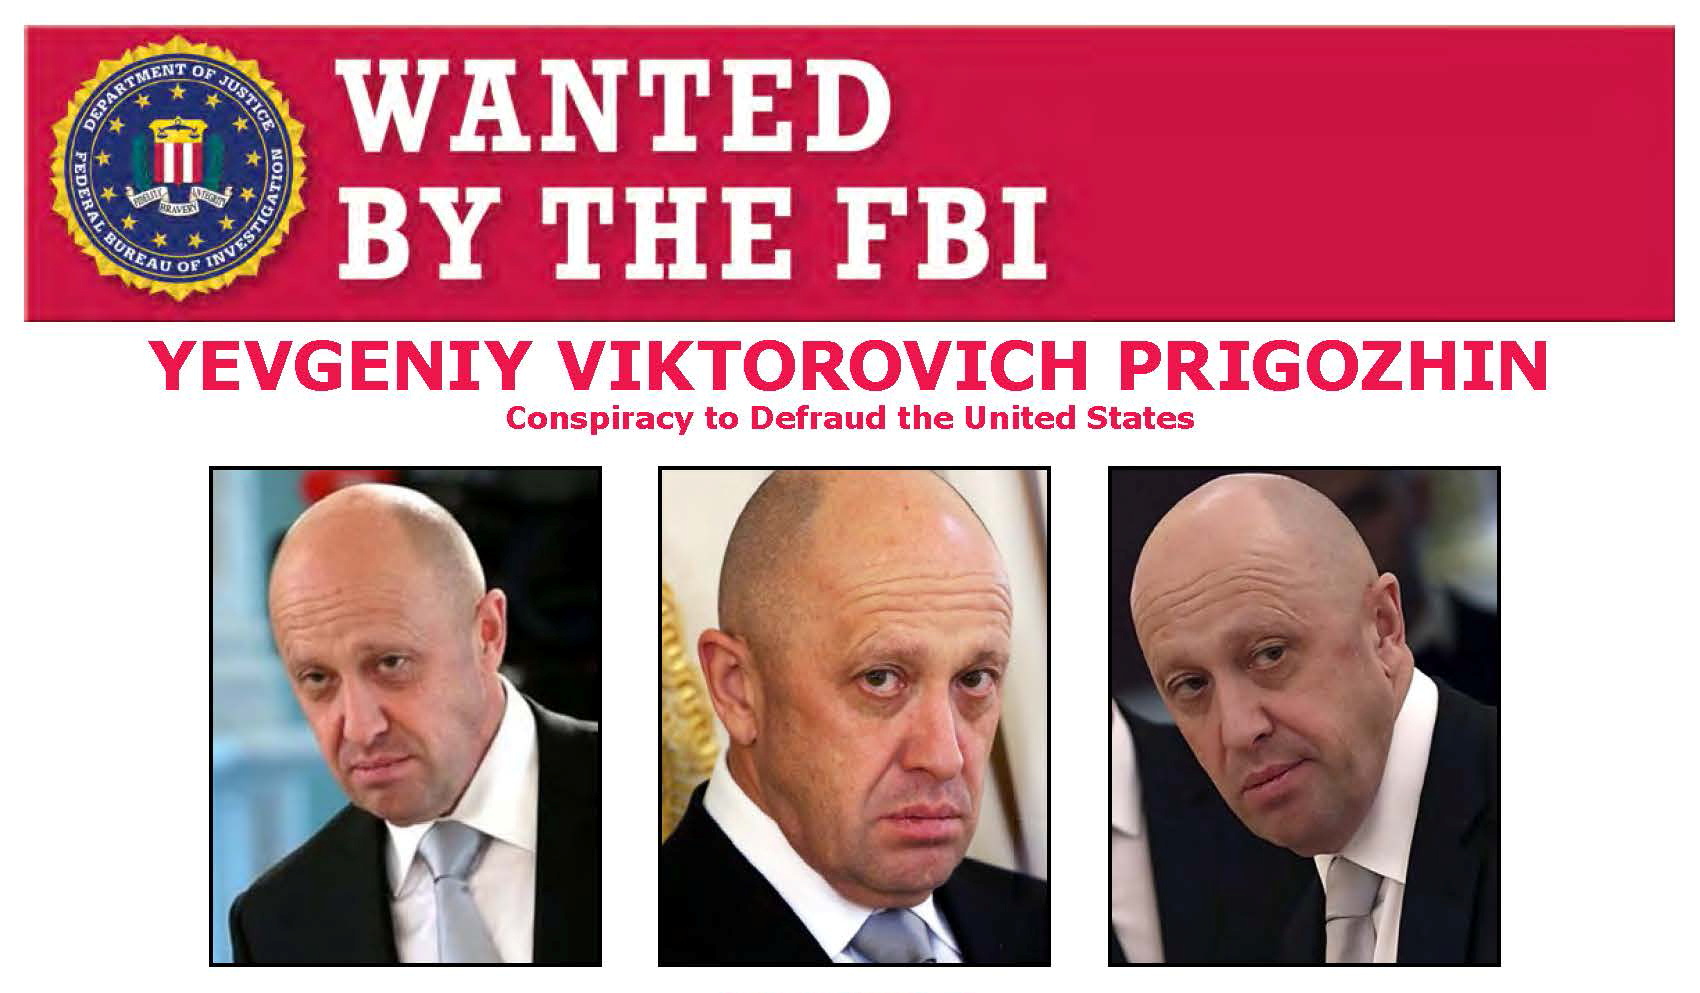 A poster with the title WANTED BY THE FBI features three photos of a bald man wearing a suit and blue tie